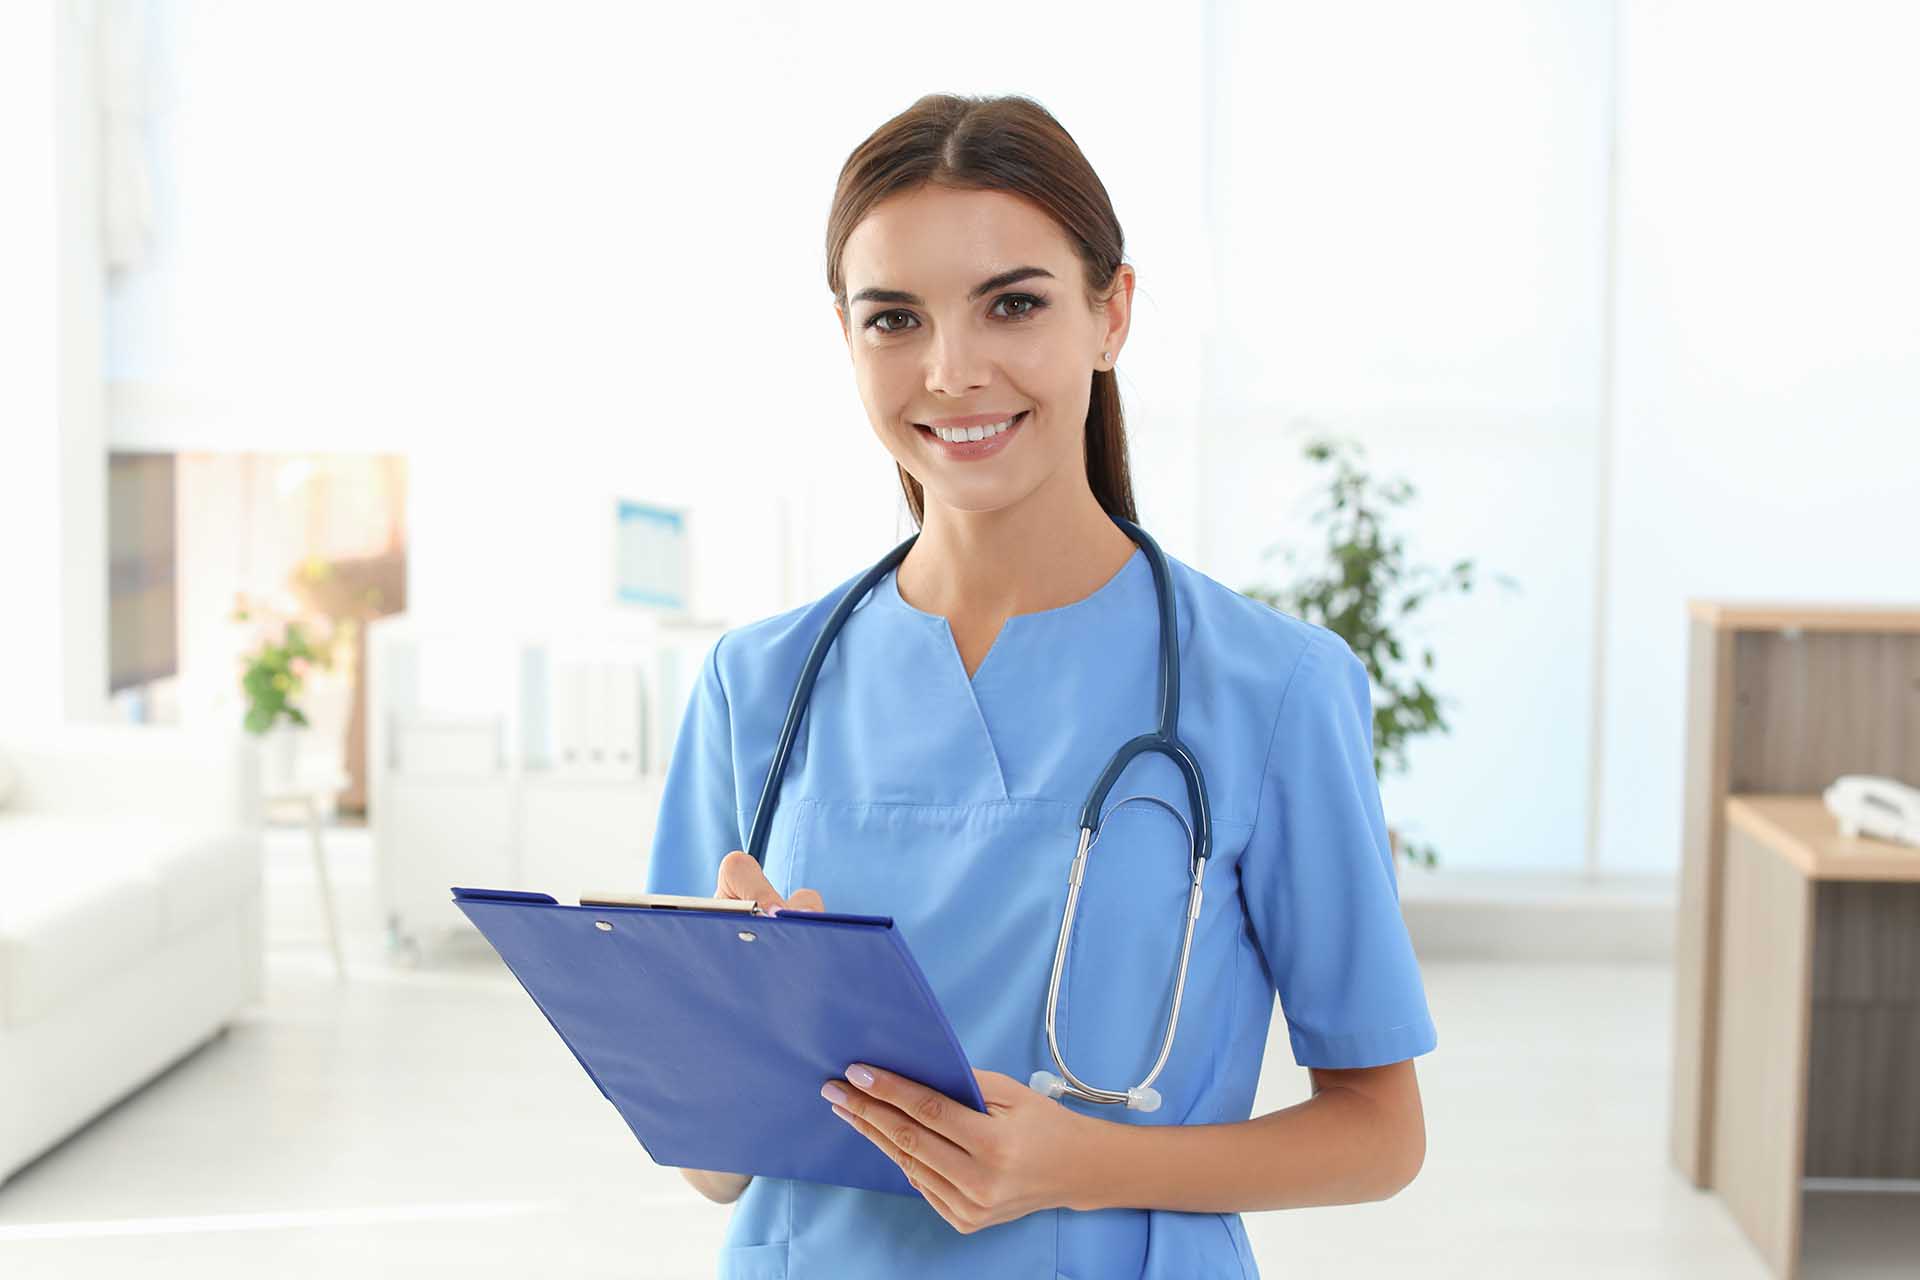 How to become Medical Assistant?